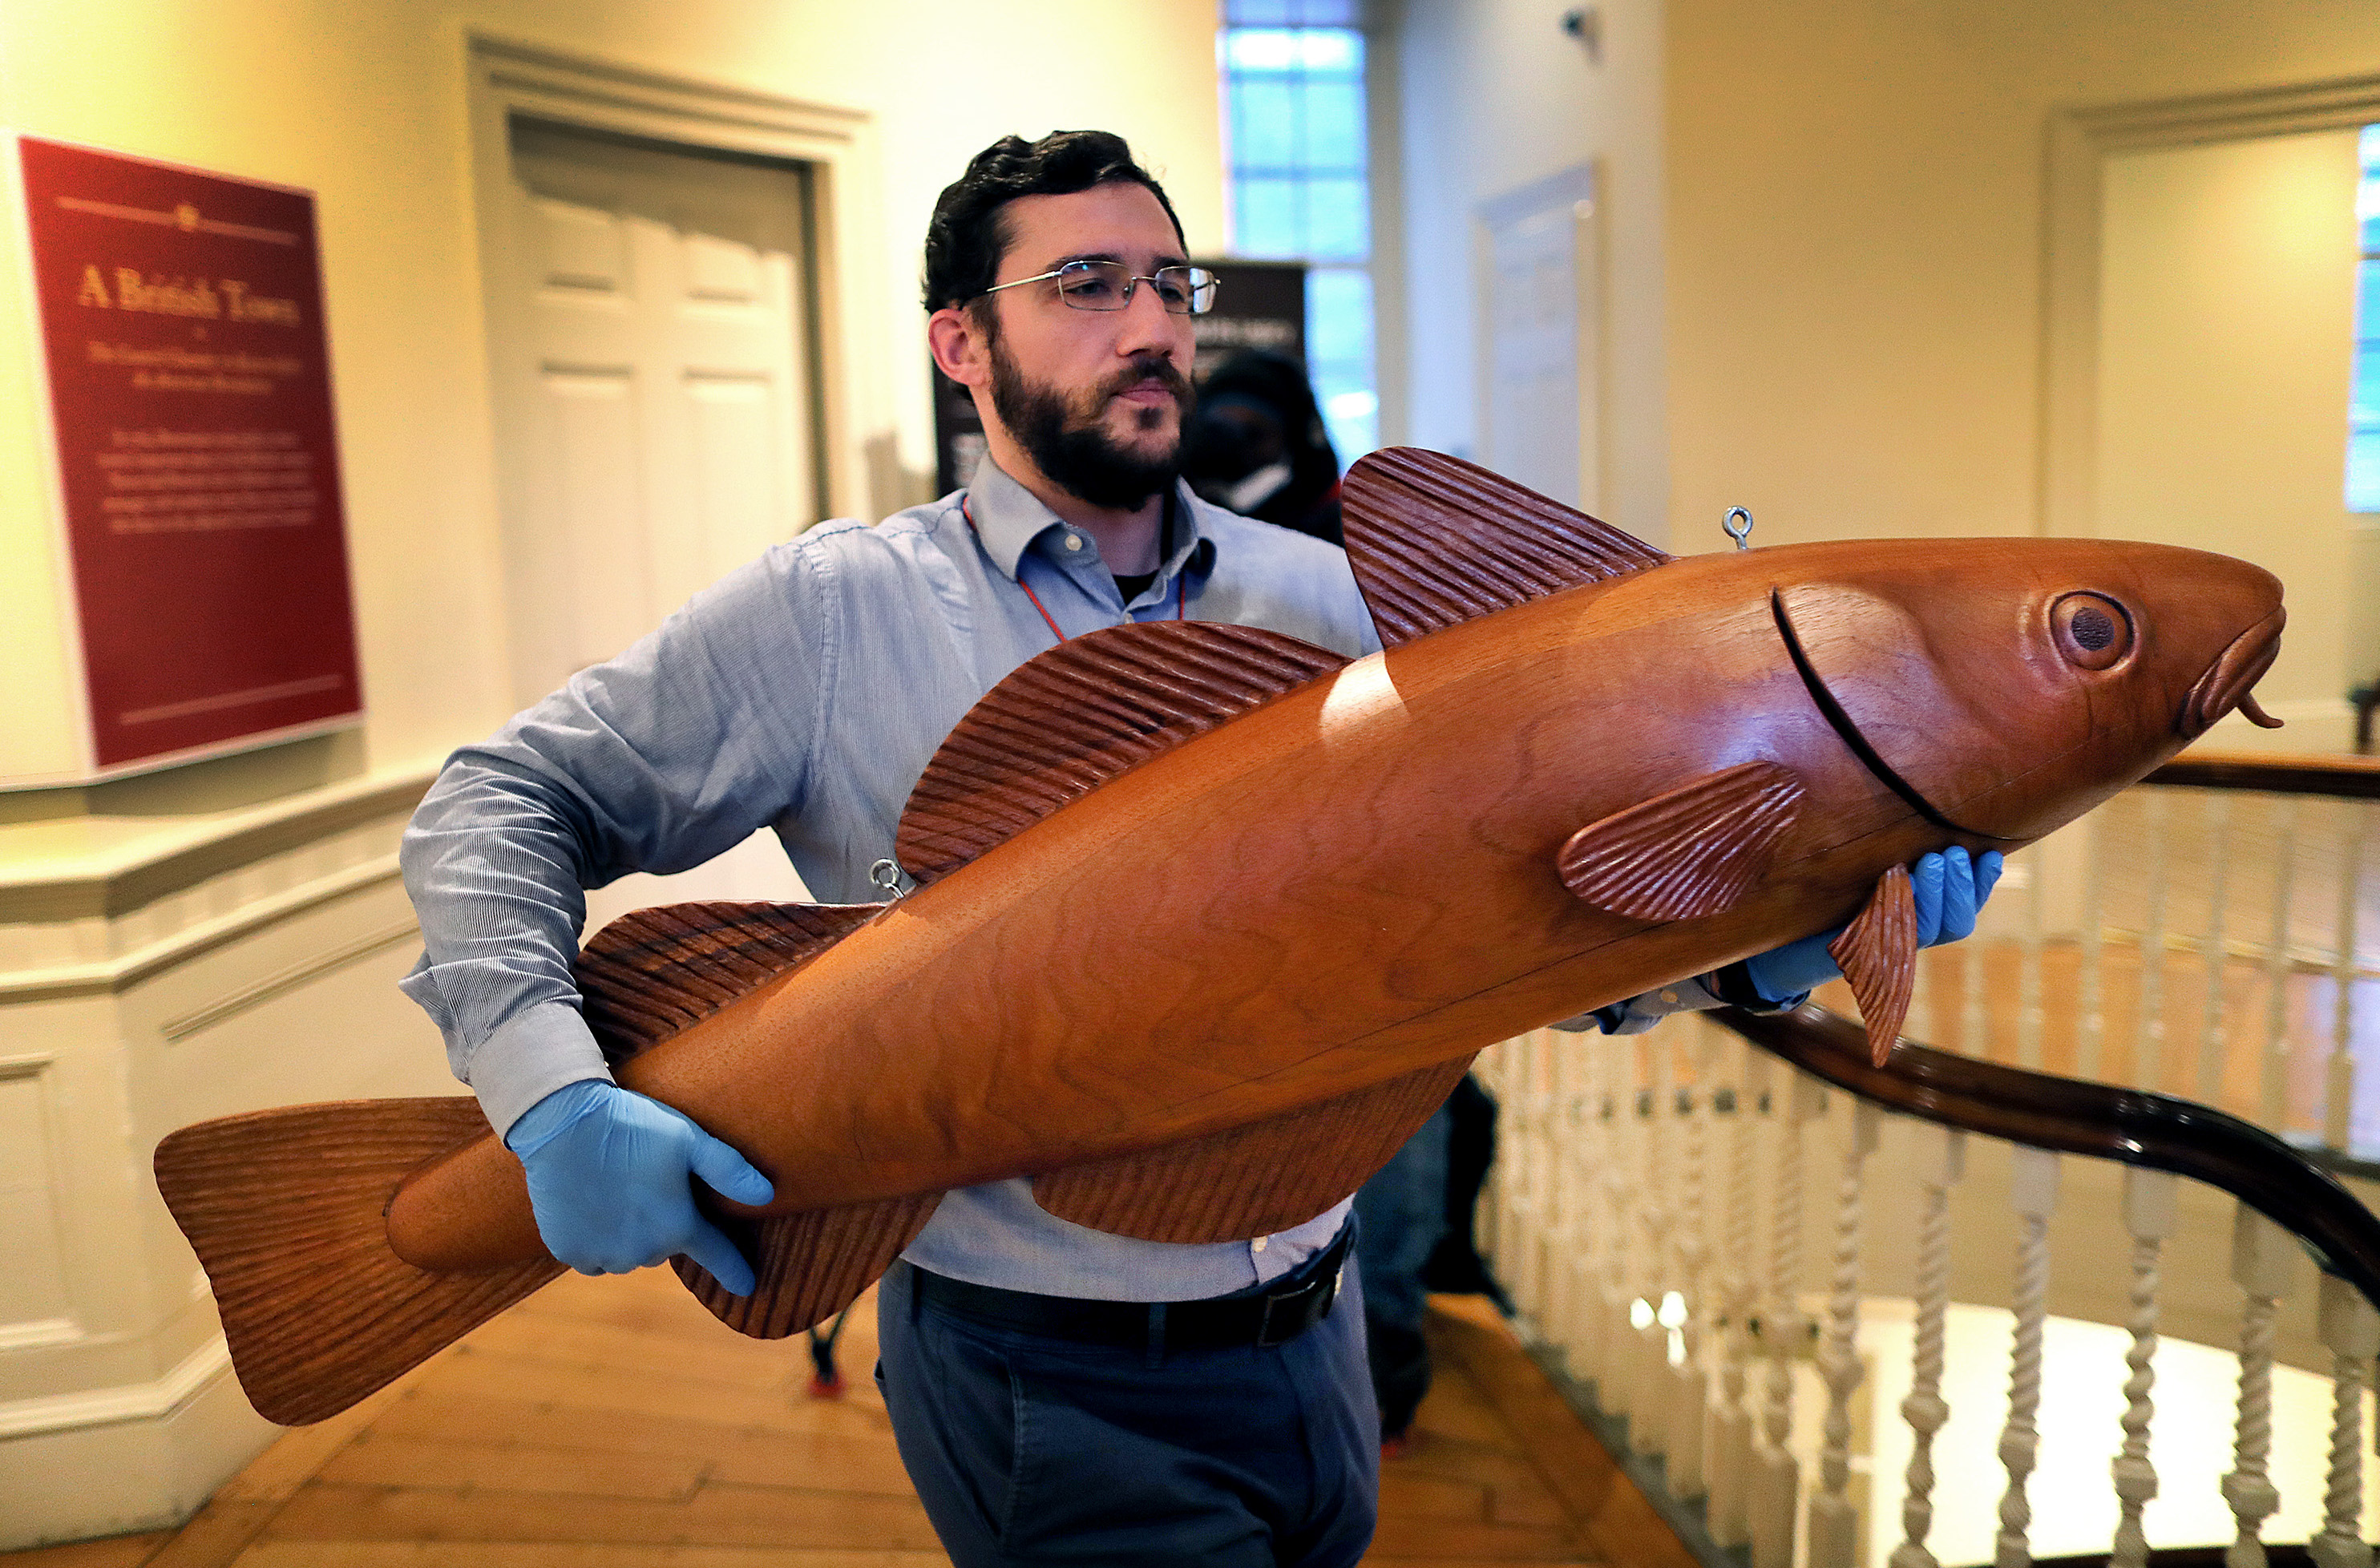 This fish swims upstream: Sacred Cod is carried once again from